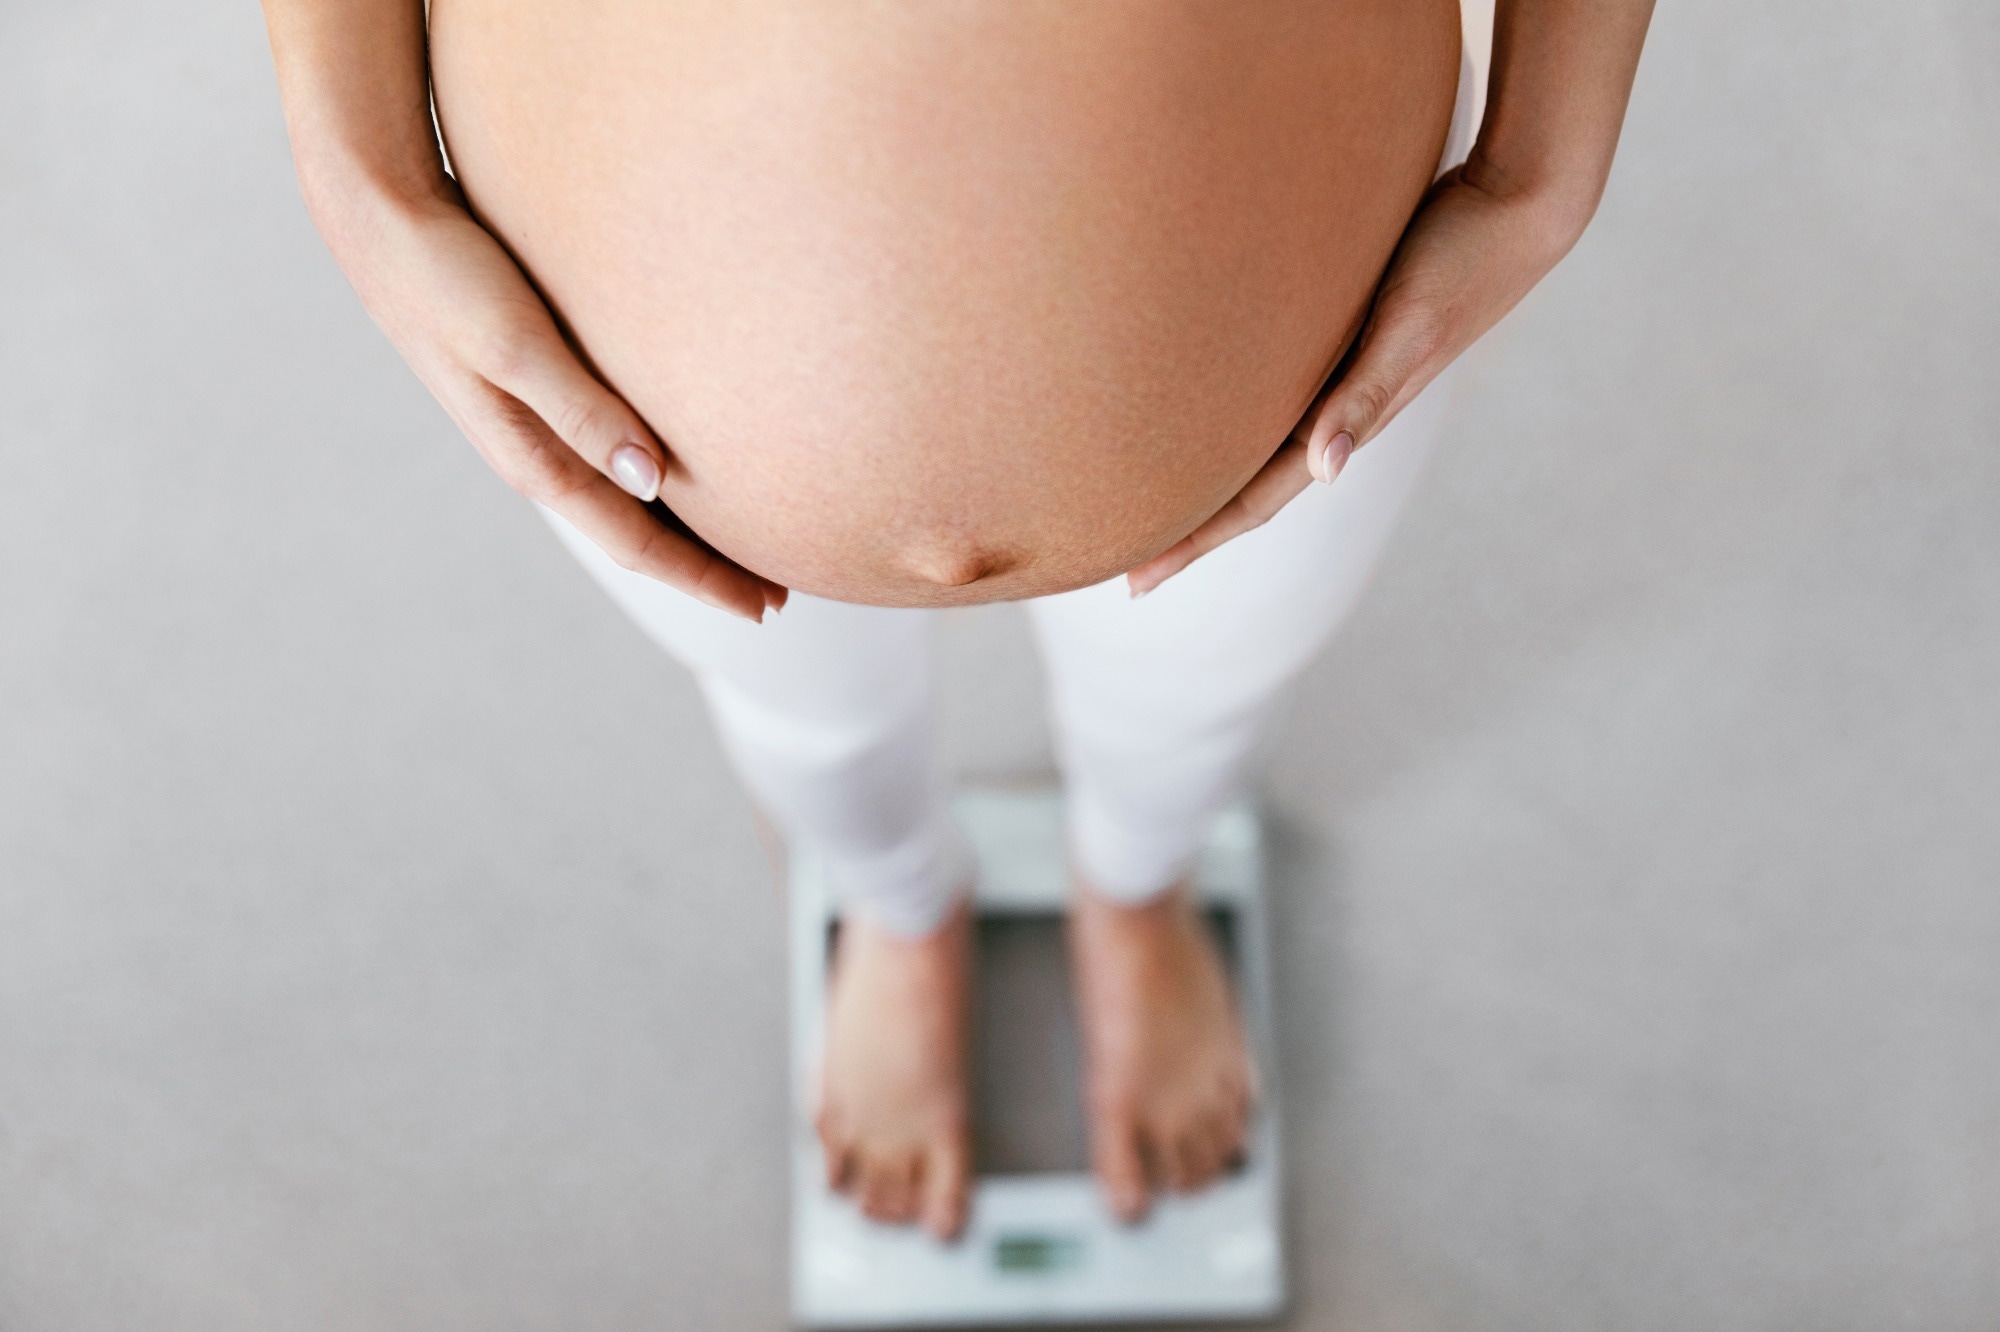 Study: Trends in Gestational Weight Gain in Louisiana, March 2019 to March 2022. Image Credit: puhhha / Shutterstock.com